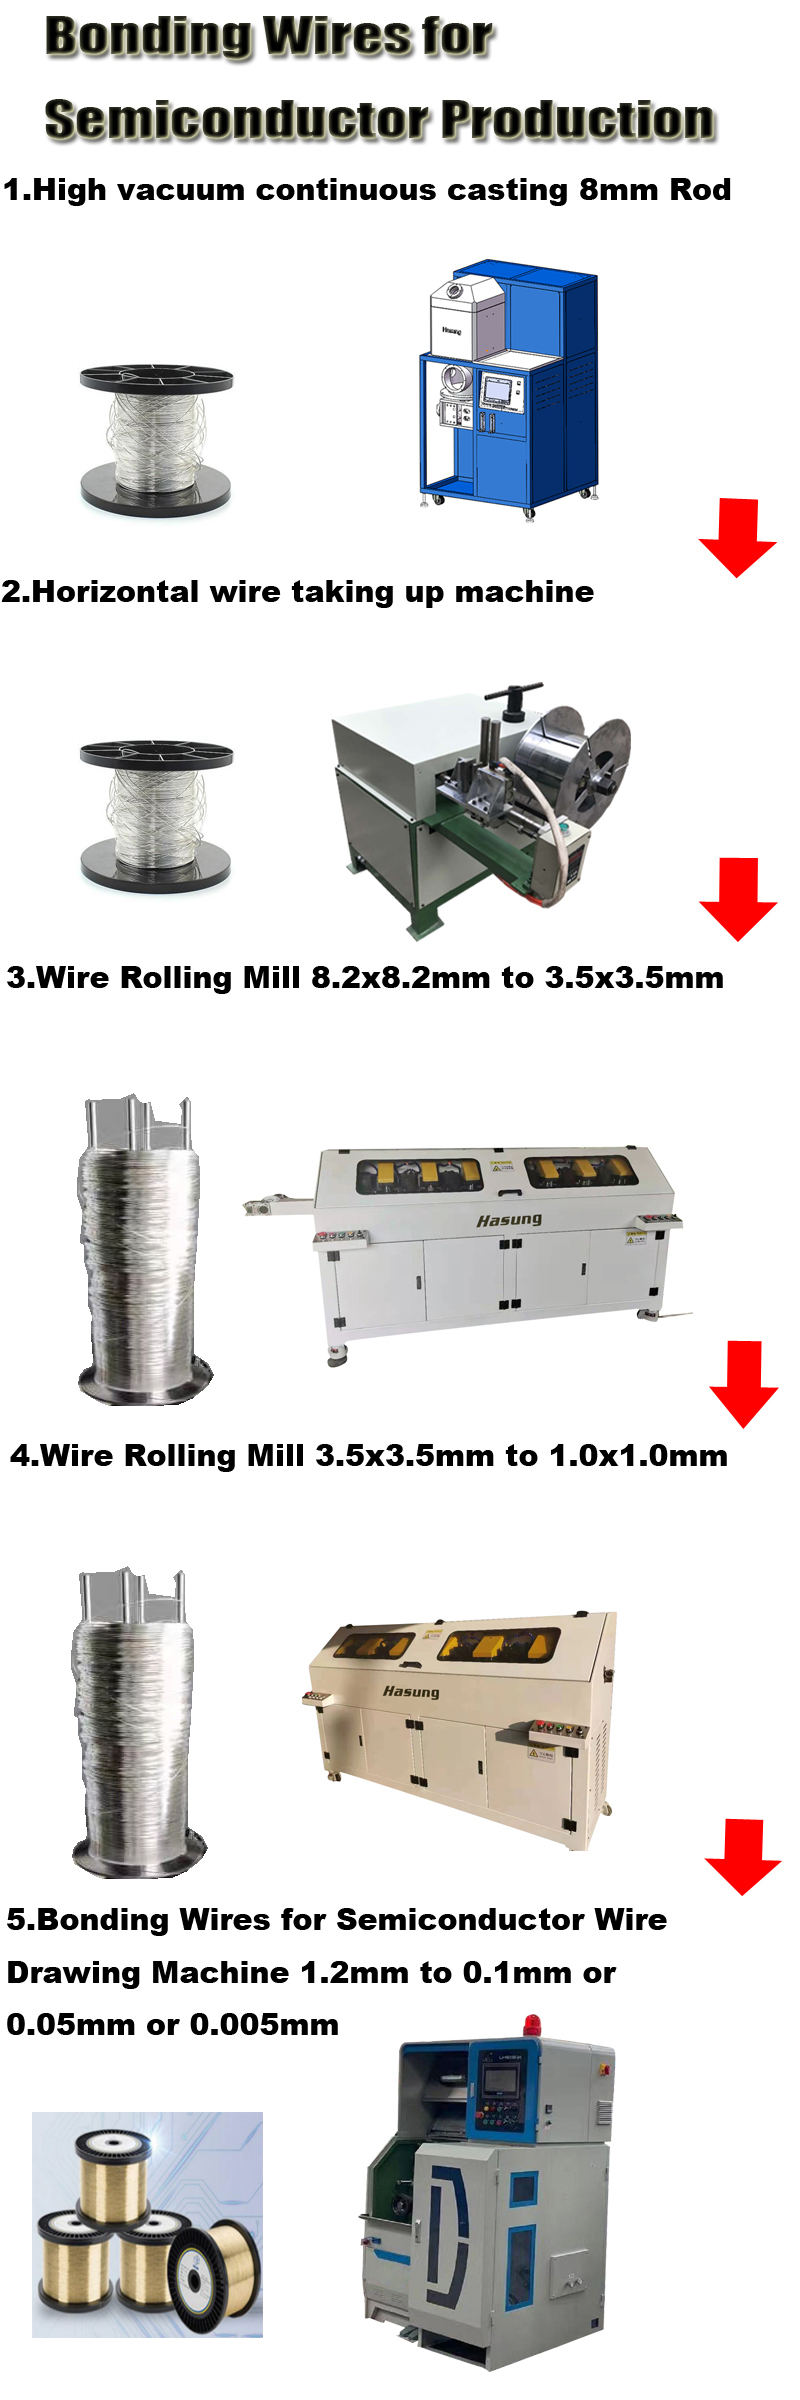 https://www.hasungcasting.com/high-vacuum-continuous-casting-machine-for-new-materials-casting-bond-gold-silver-copper-wire-product/